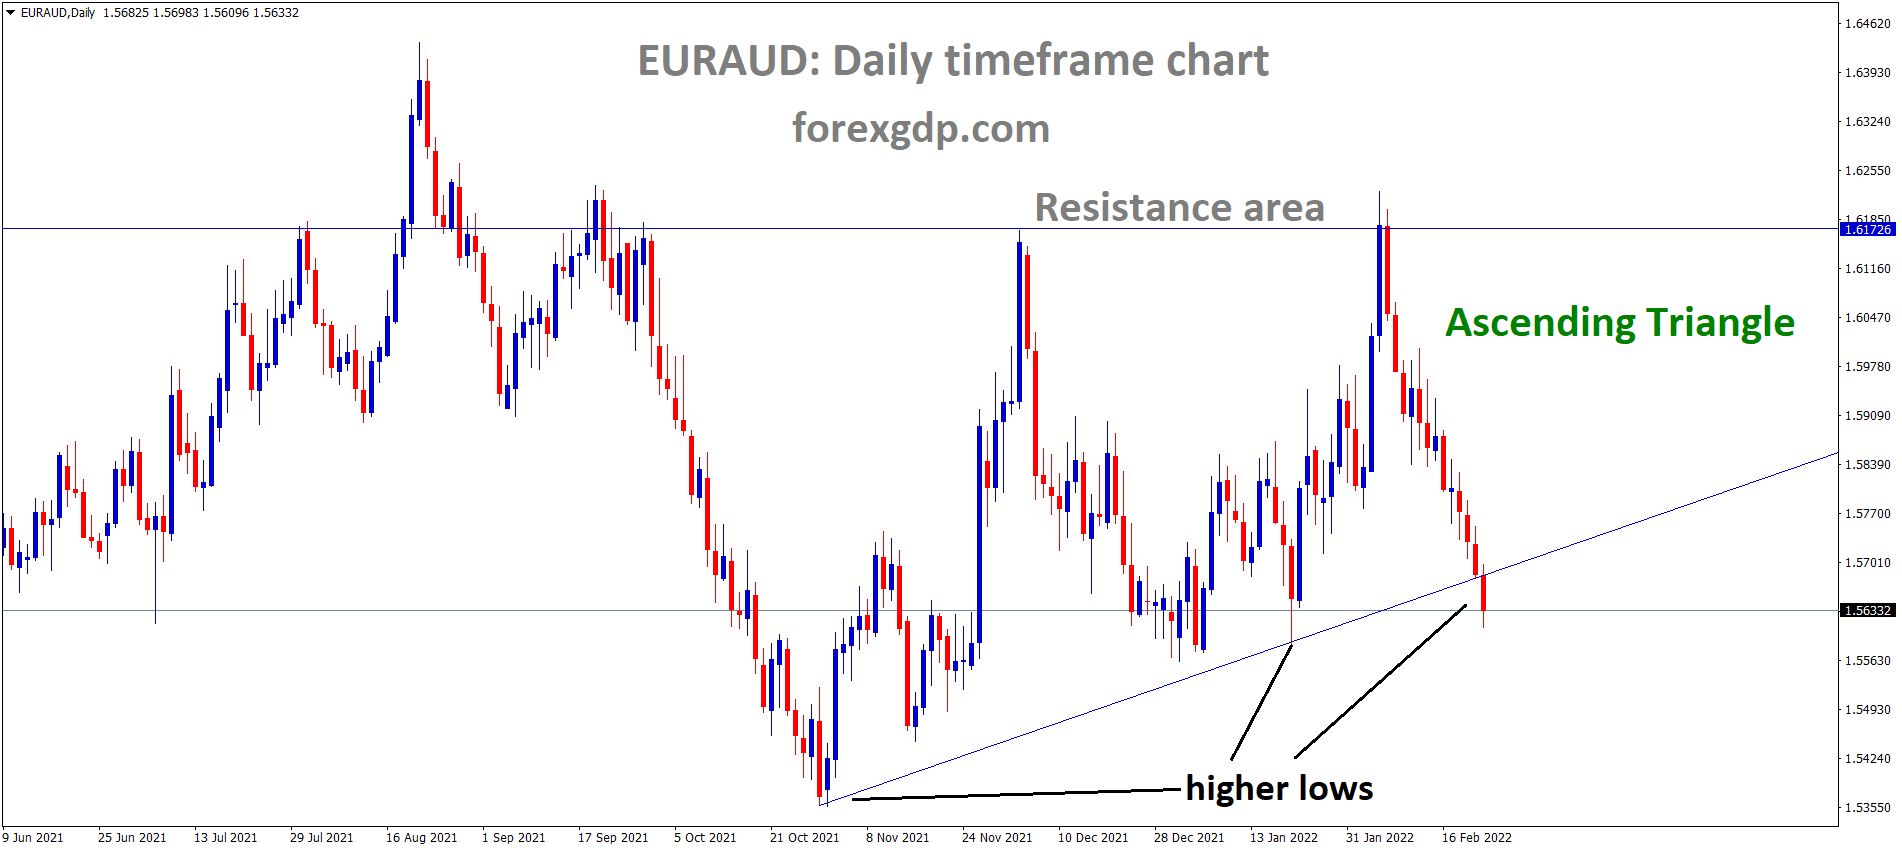 EURAUD is moving in an ascending triangle pattern and the market has reached the higher low area of the Triangle pattern.